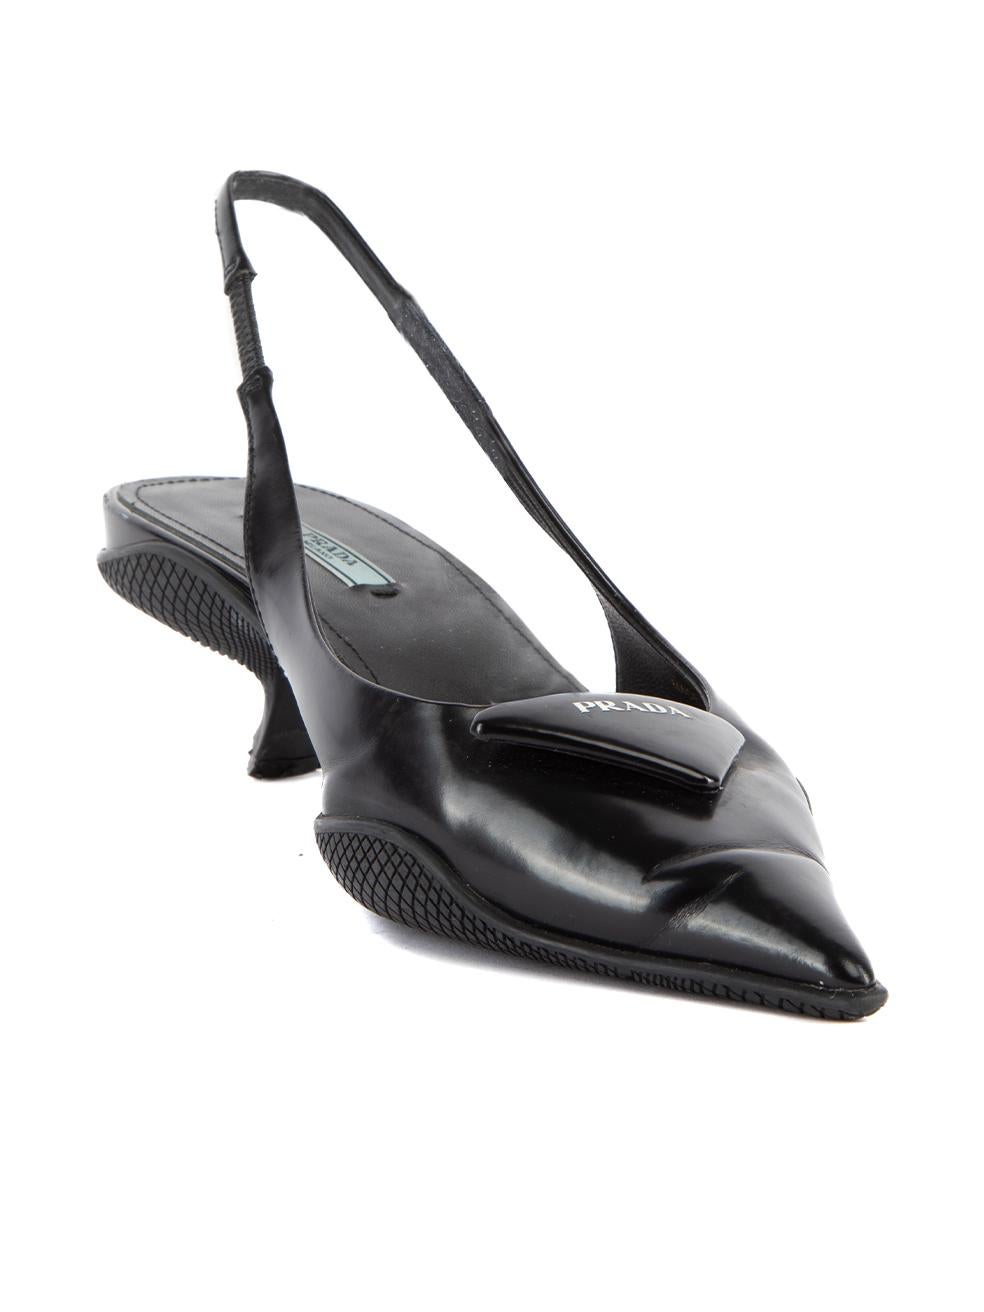 CONDITION is Very good. Minimal wear to pumps is evident. Minimal wear to the toe point where creasing to the leather can be seen on this used Prada designer resale item. Details Black Leather Pointed toe slingback Kitten heel Padded iconic triangle